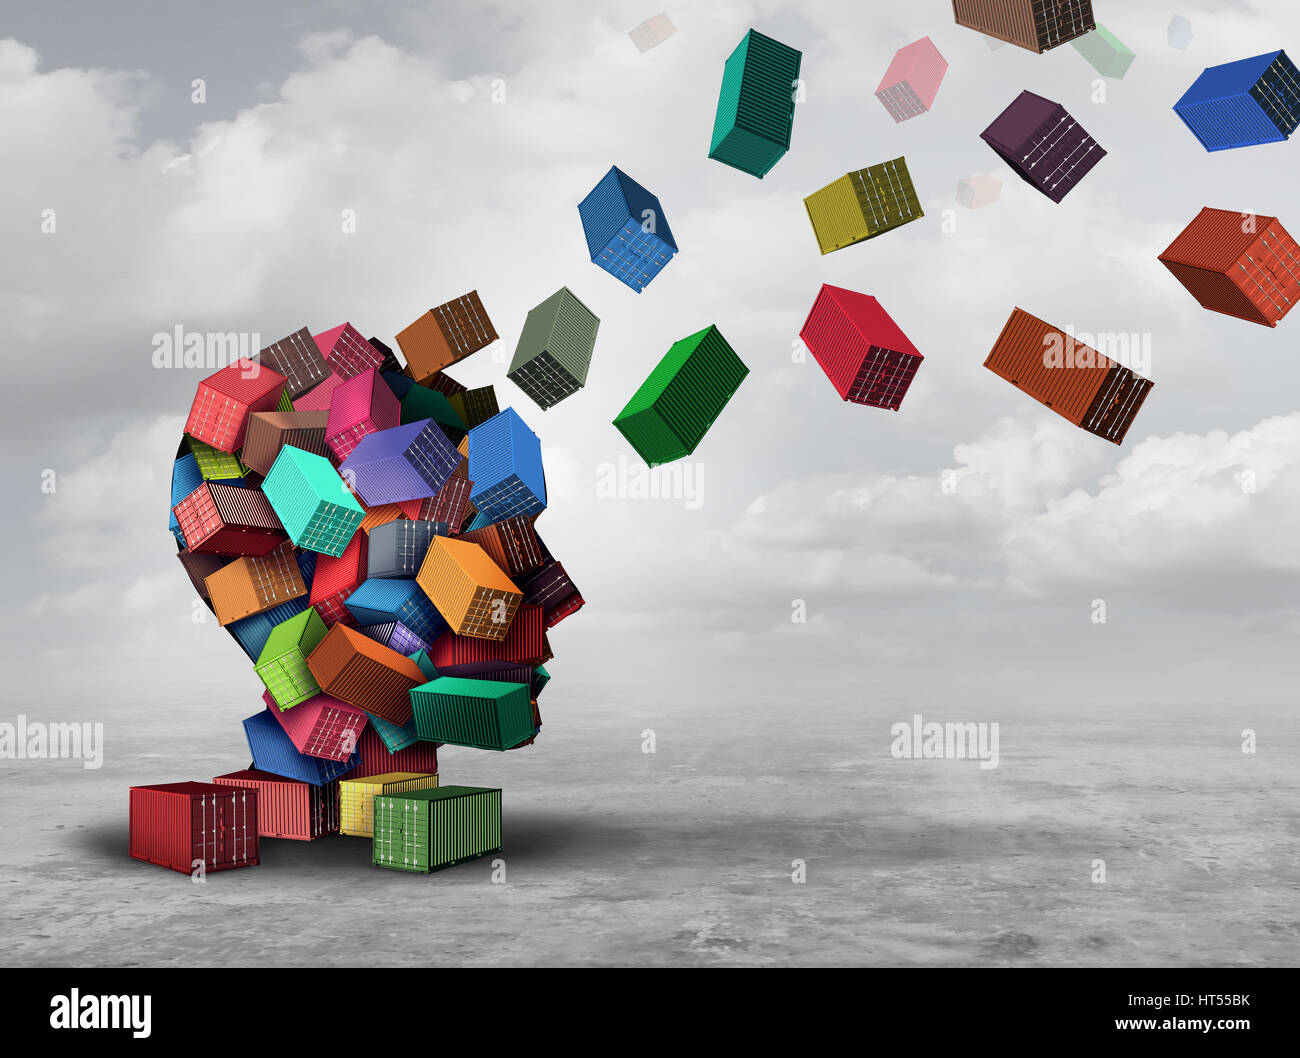 Cargo distribution concept and freight logistics management symbol as a group of shipping containers shaped as a human head with parcel boxes. Stock Photo